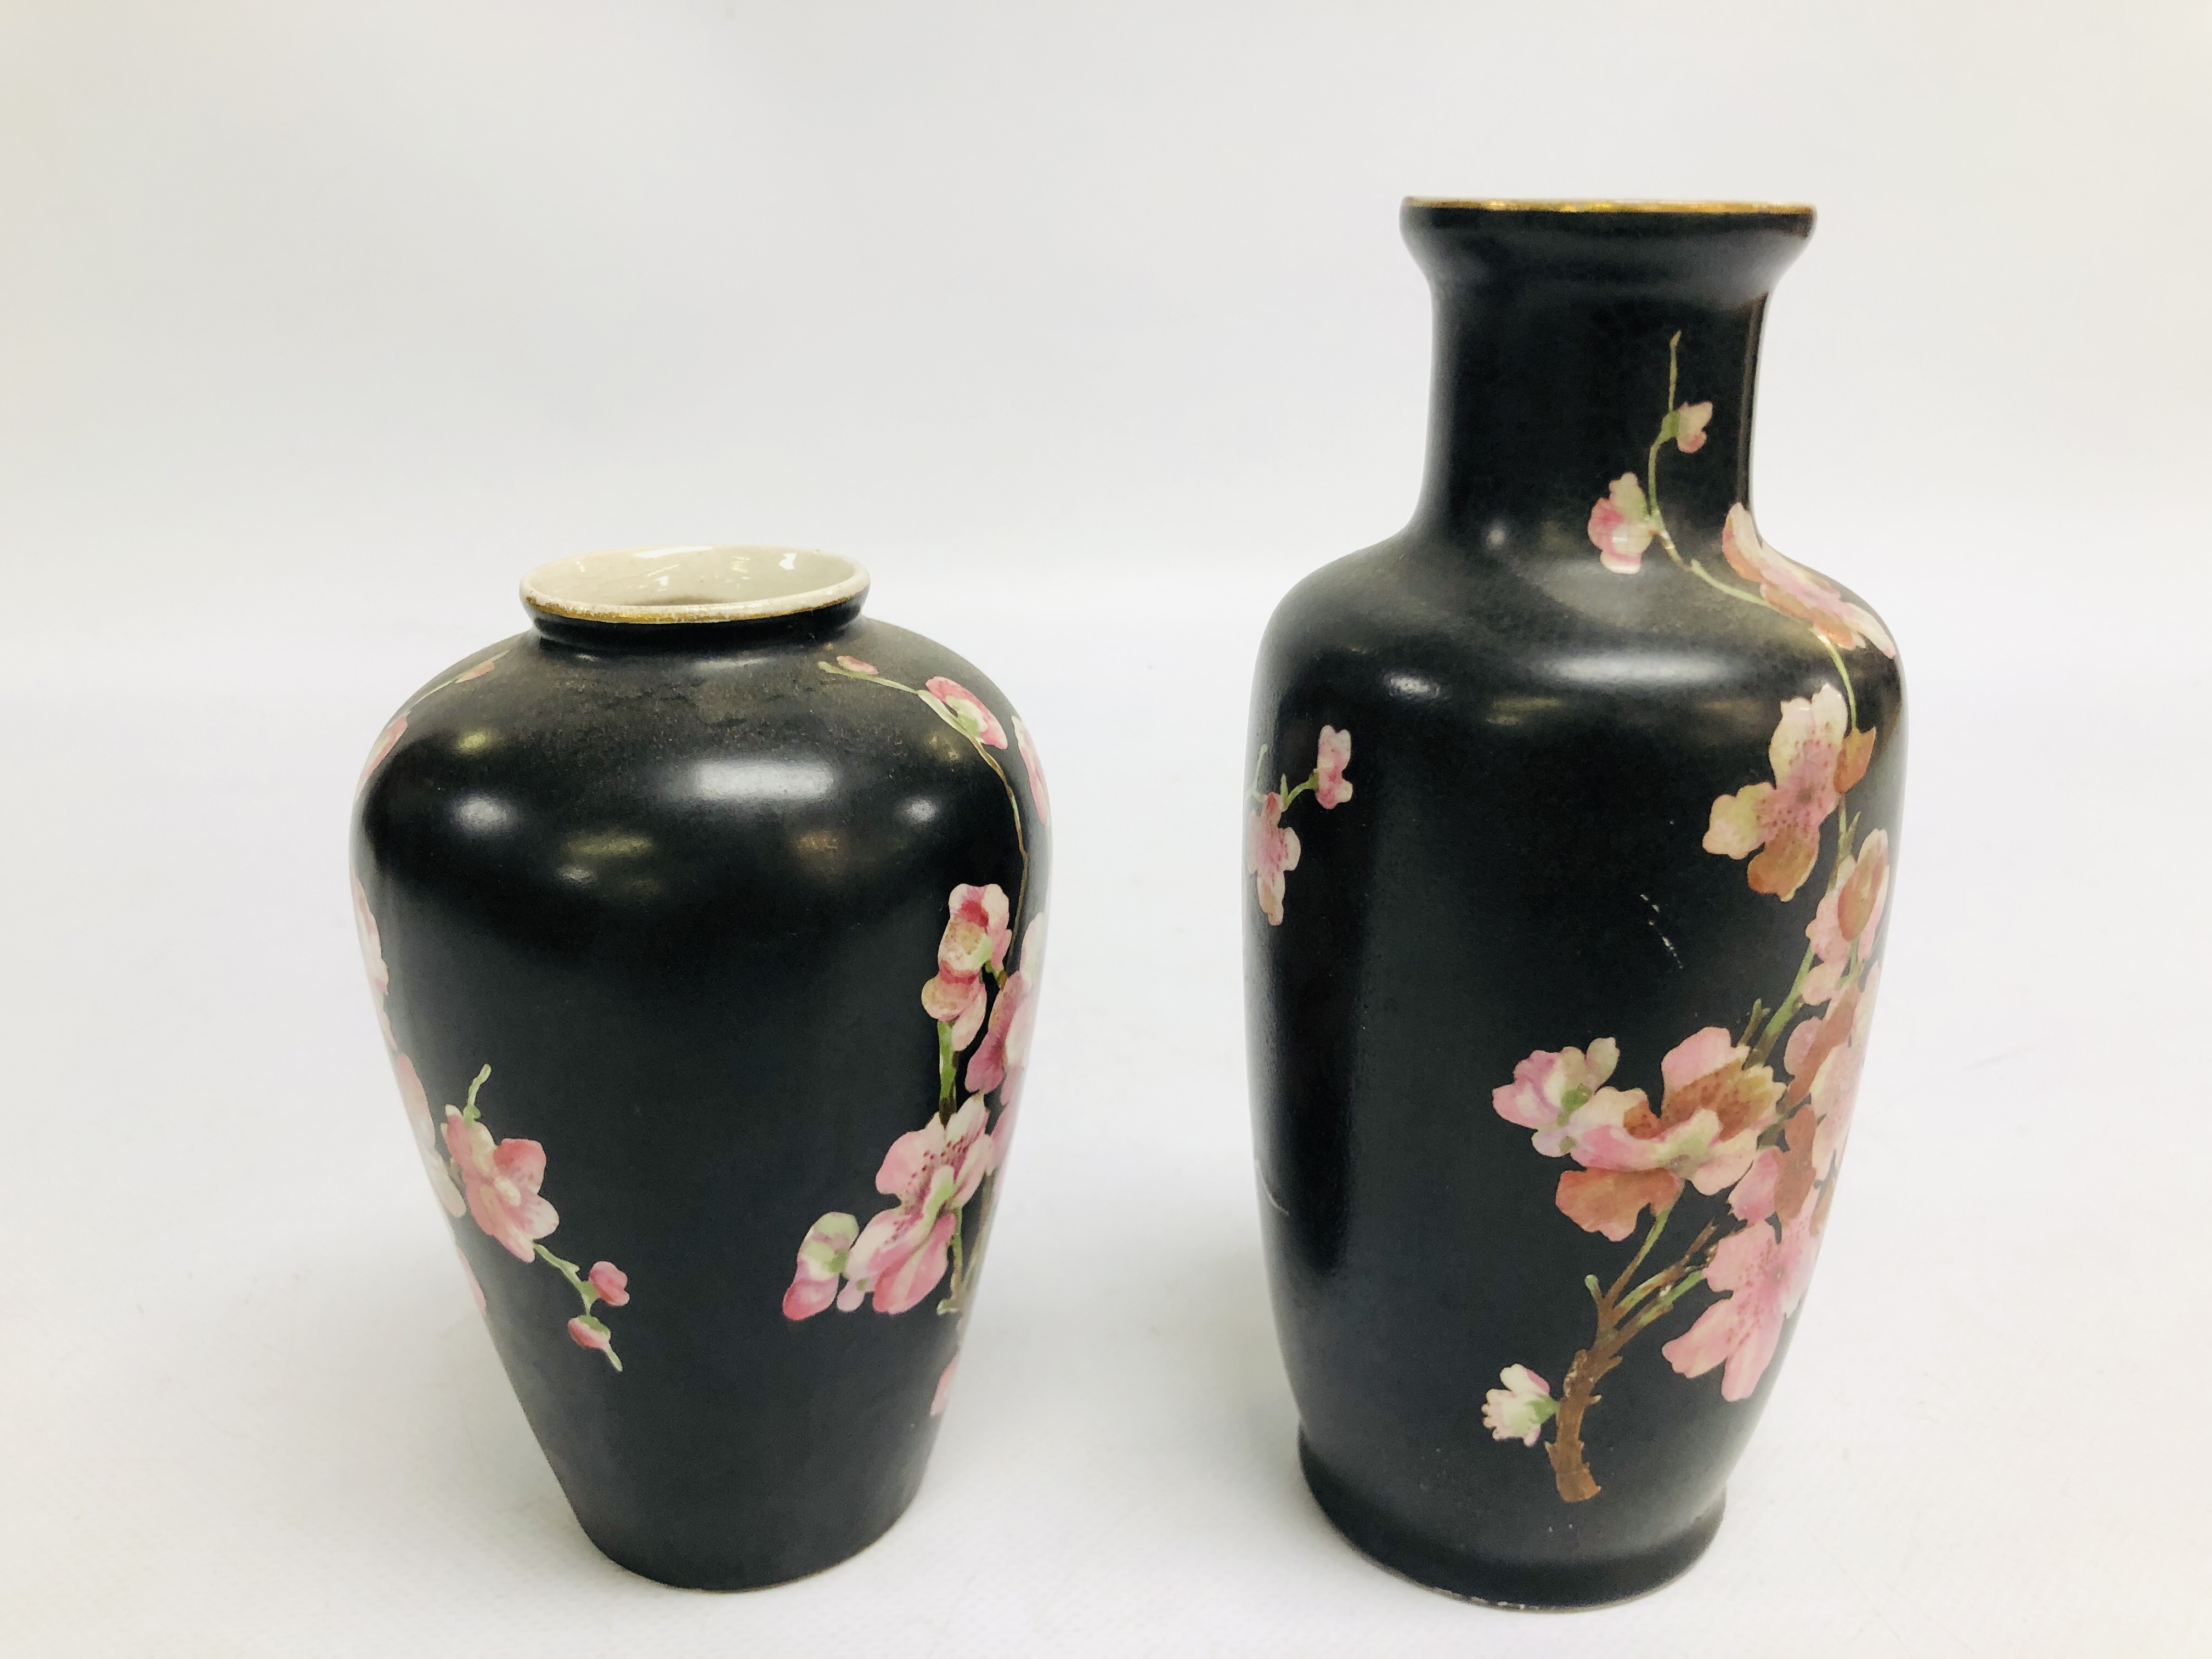 TWO SIMILAR STAFFORDSHIRE VASES DECORATED ON A BLACK GROUND WITH PRUNUS BLOSSOM, c. 1900. - Image 2 of 8